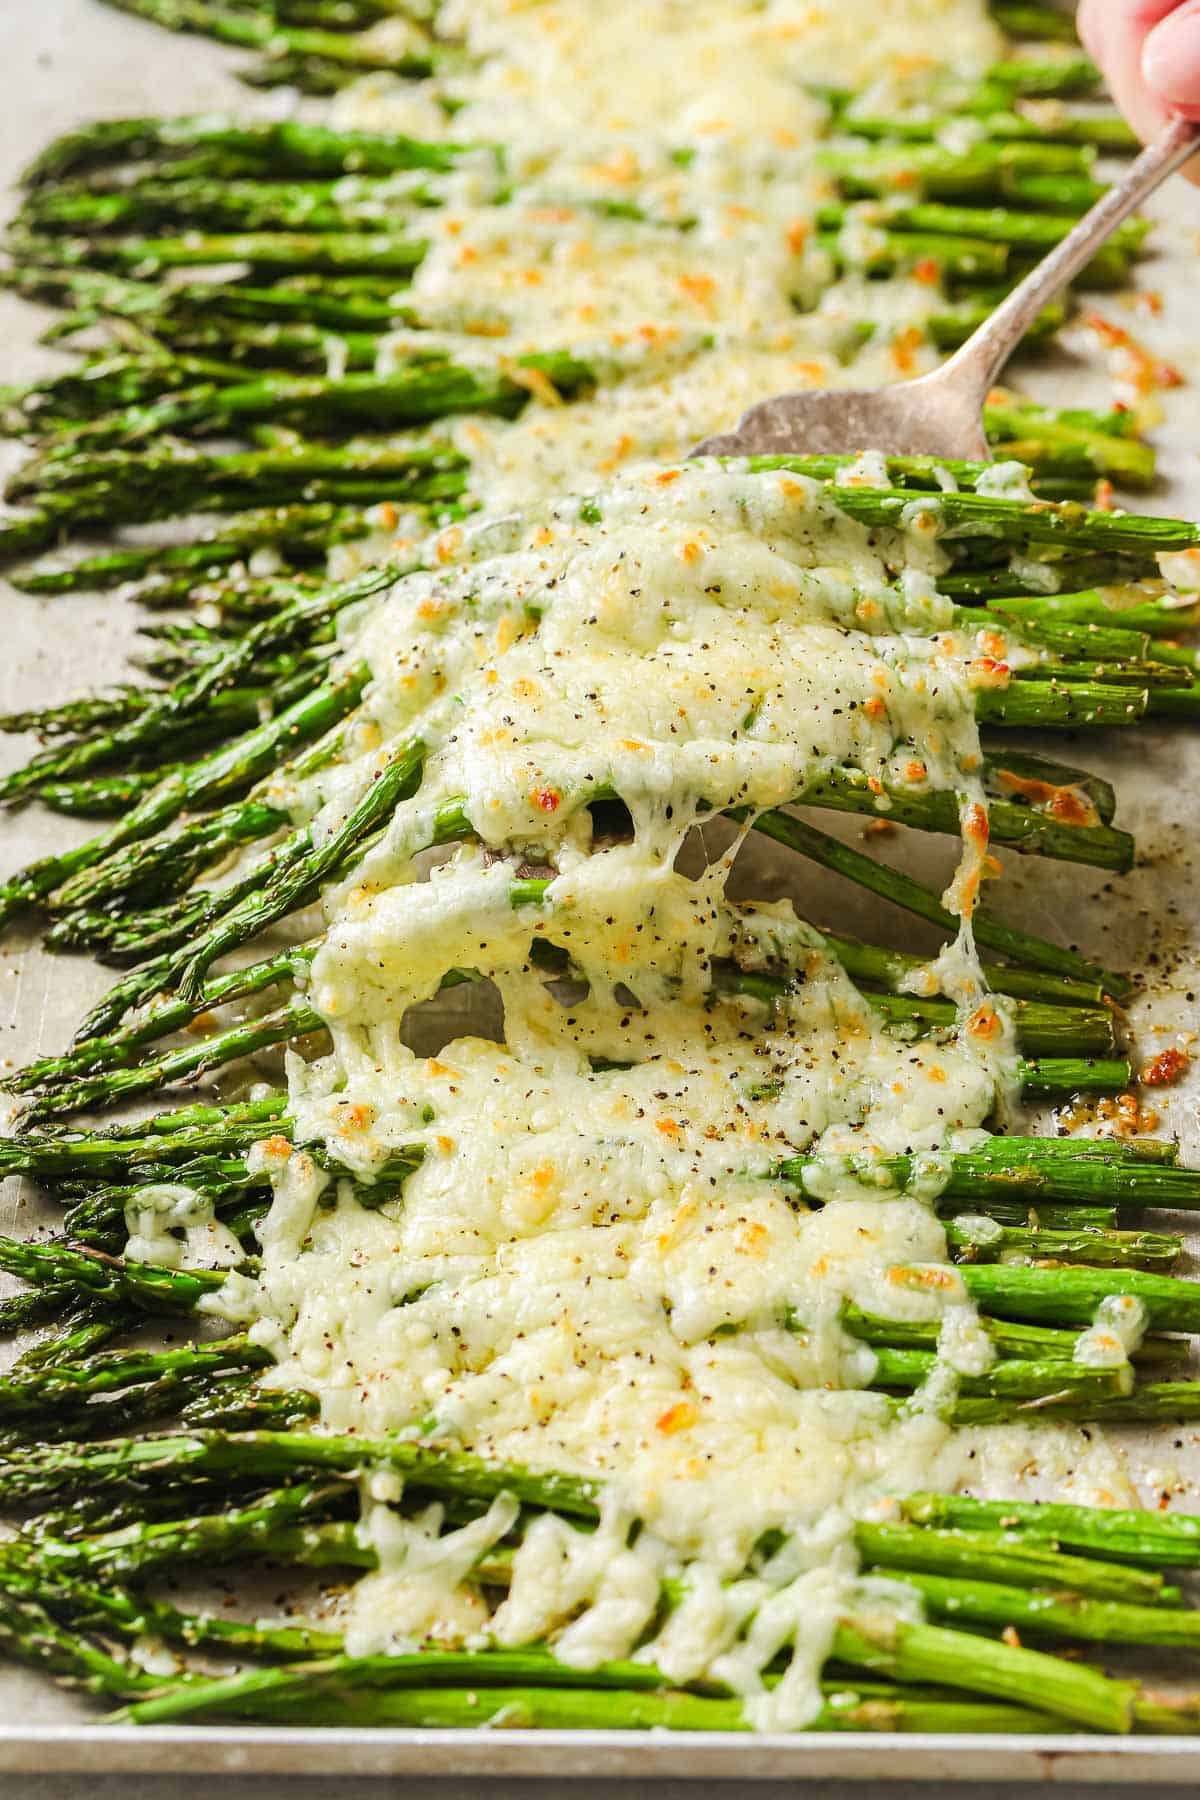 a baking sheet lined with parchment paper, full of roasted asparagus, garlic and melted cheese.